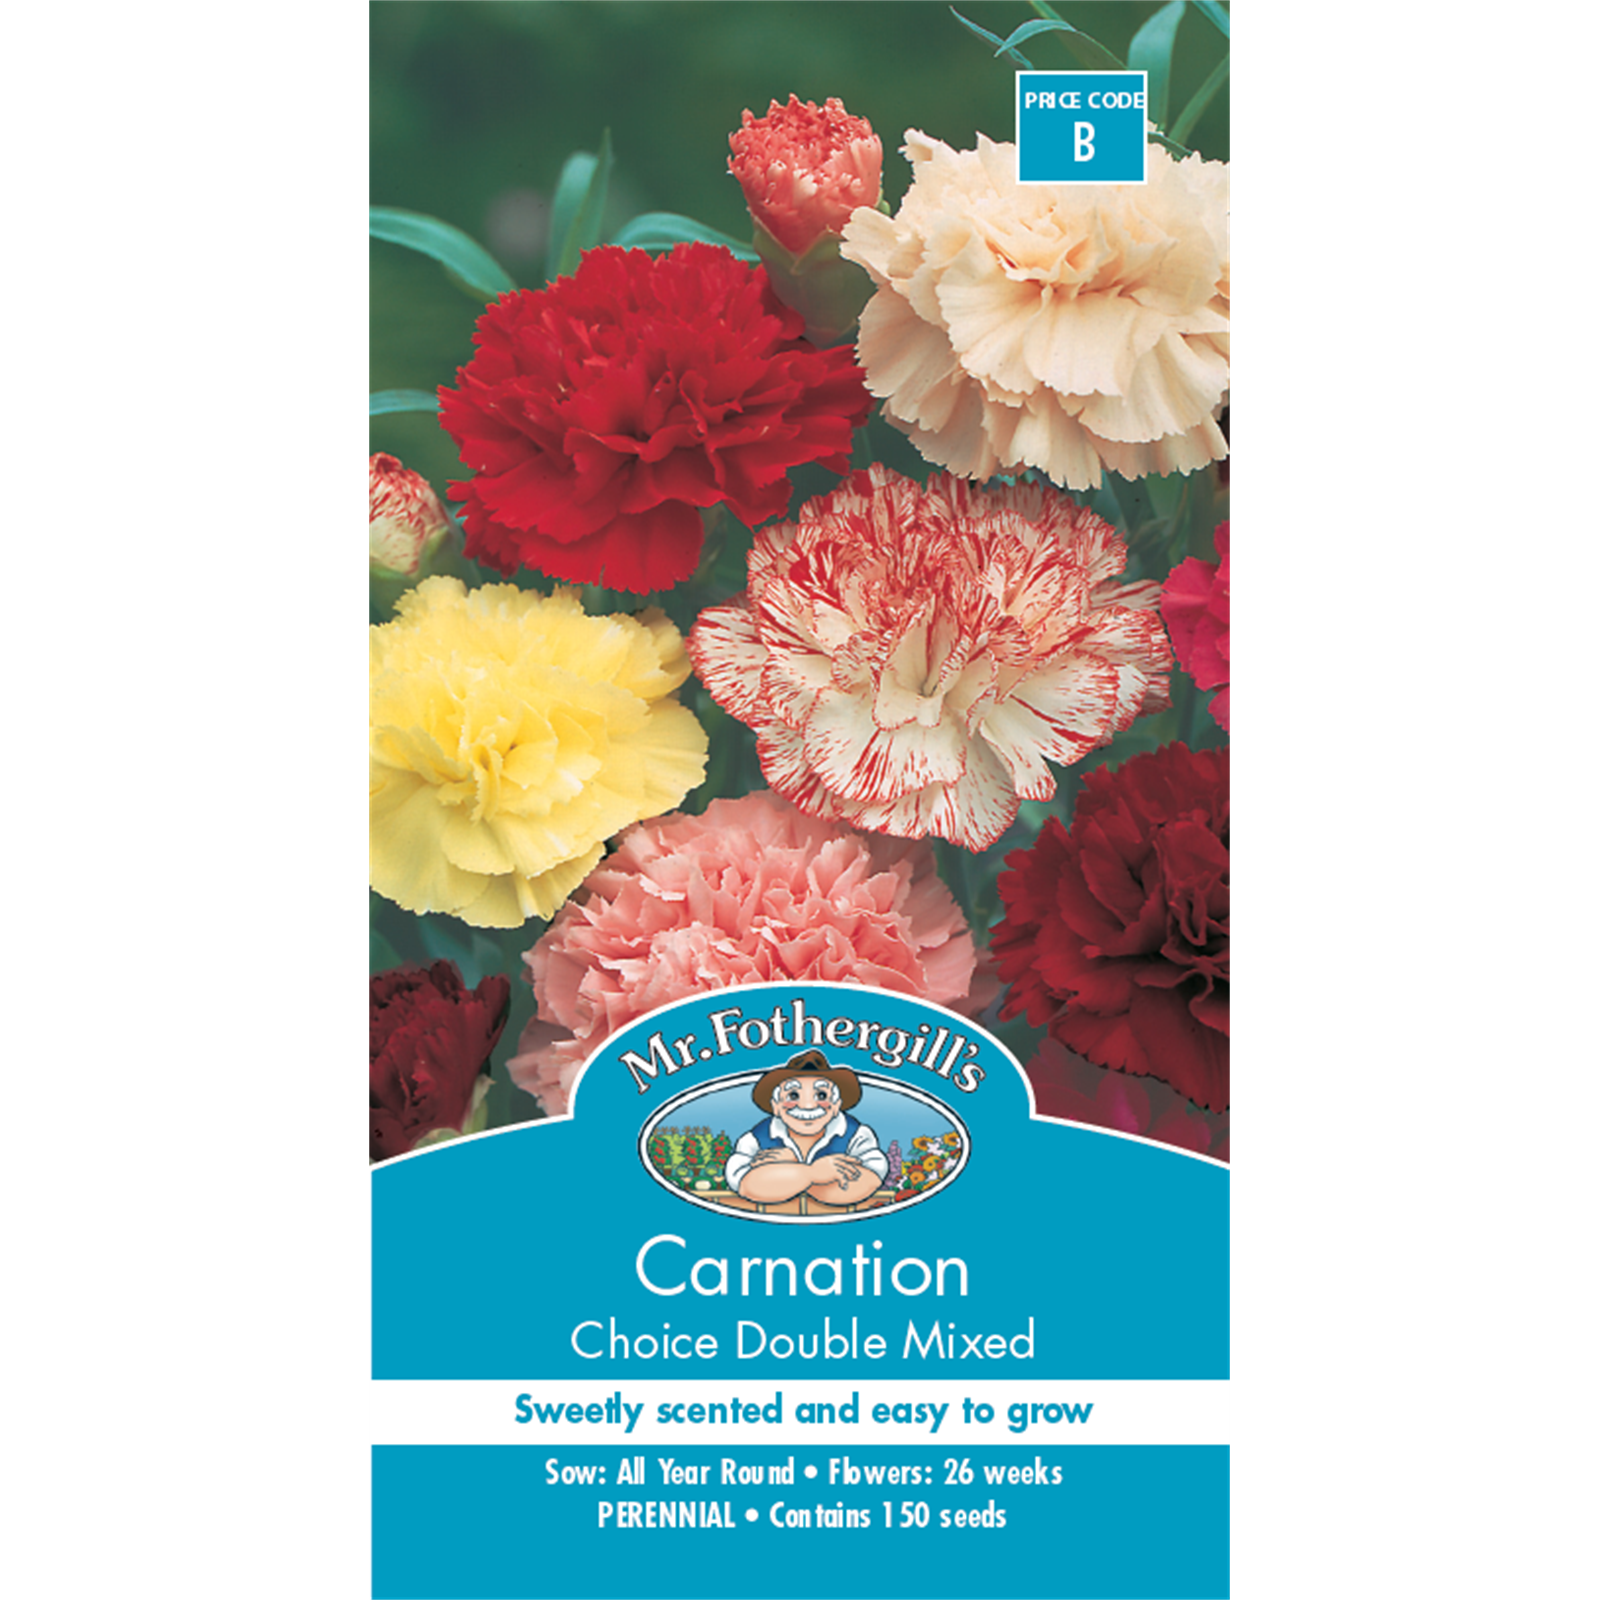 Mr Fothergill's Carnation Choice Double Mixed Flower Seeds